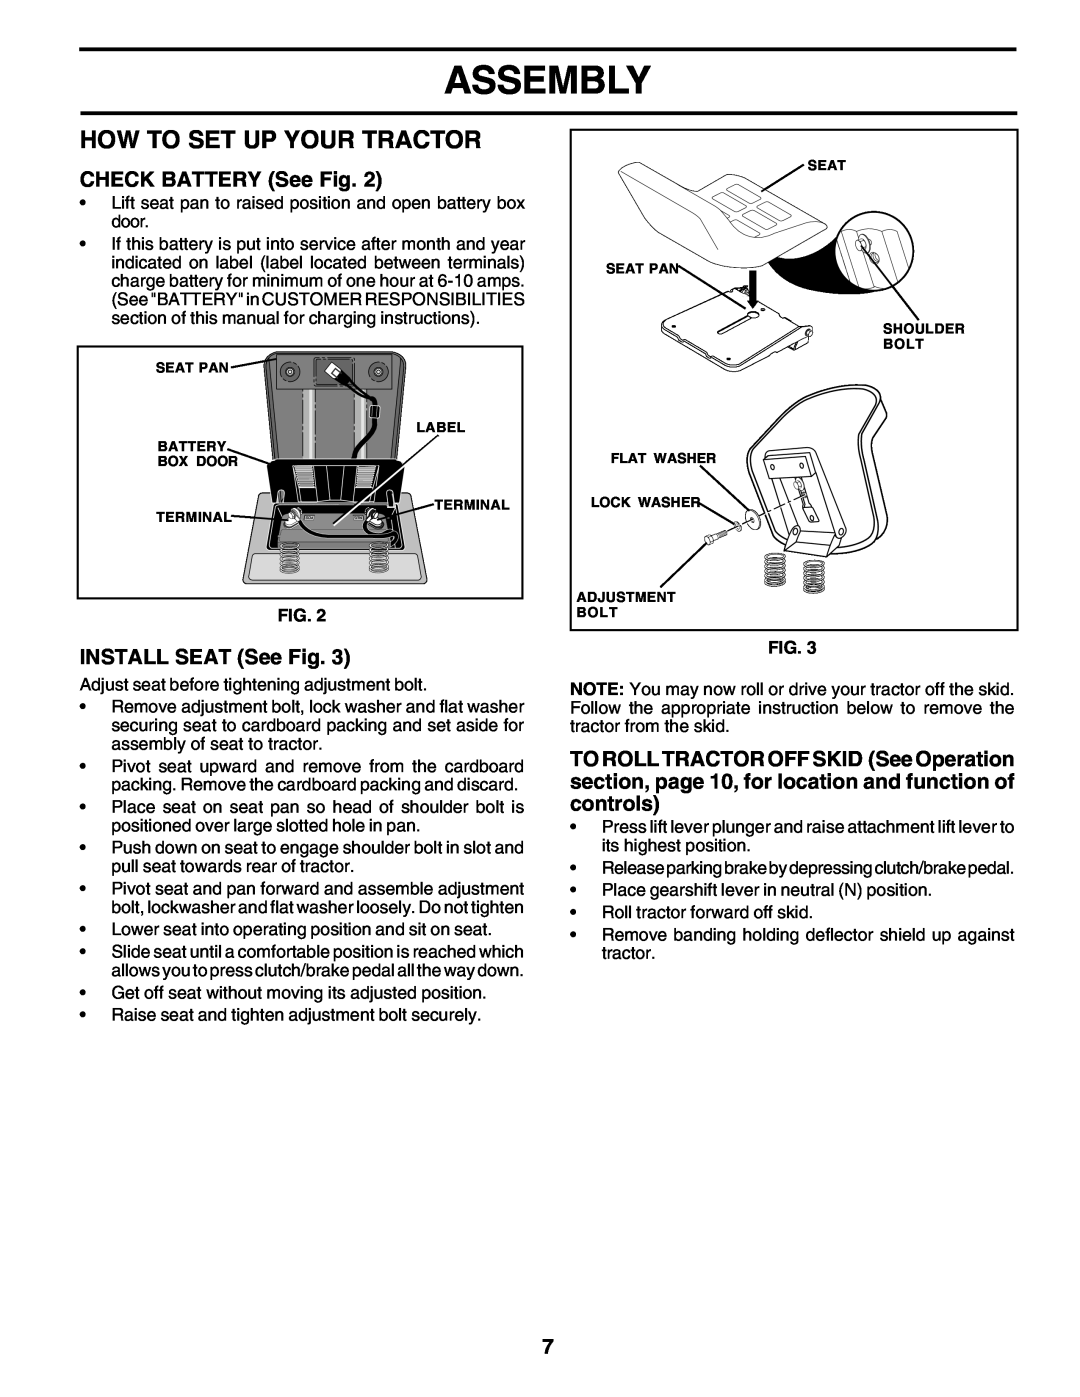 Weed Eater WE12538J manual How To Set Up Your Tractor, Assembly, CHECK BATTERY See Fig, INSTALL SEAT See Fig 